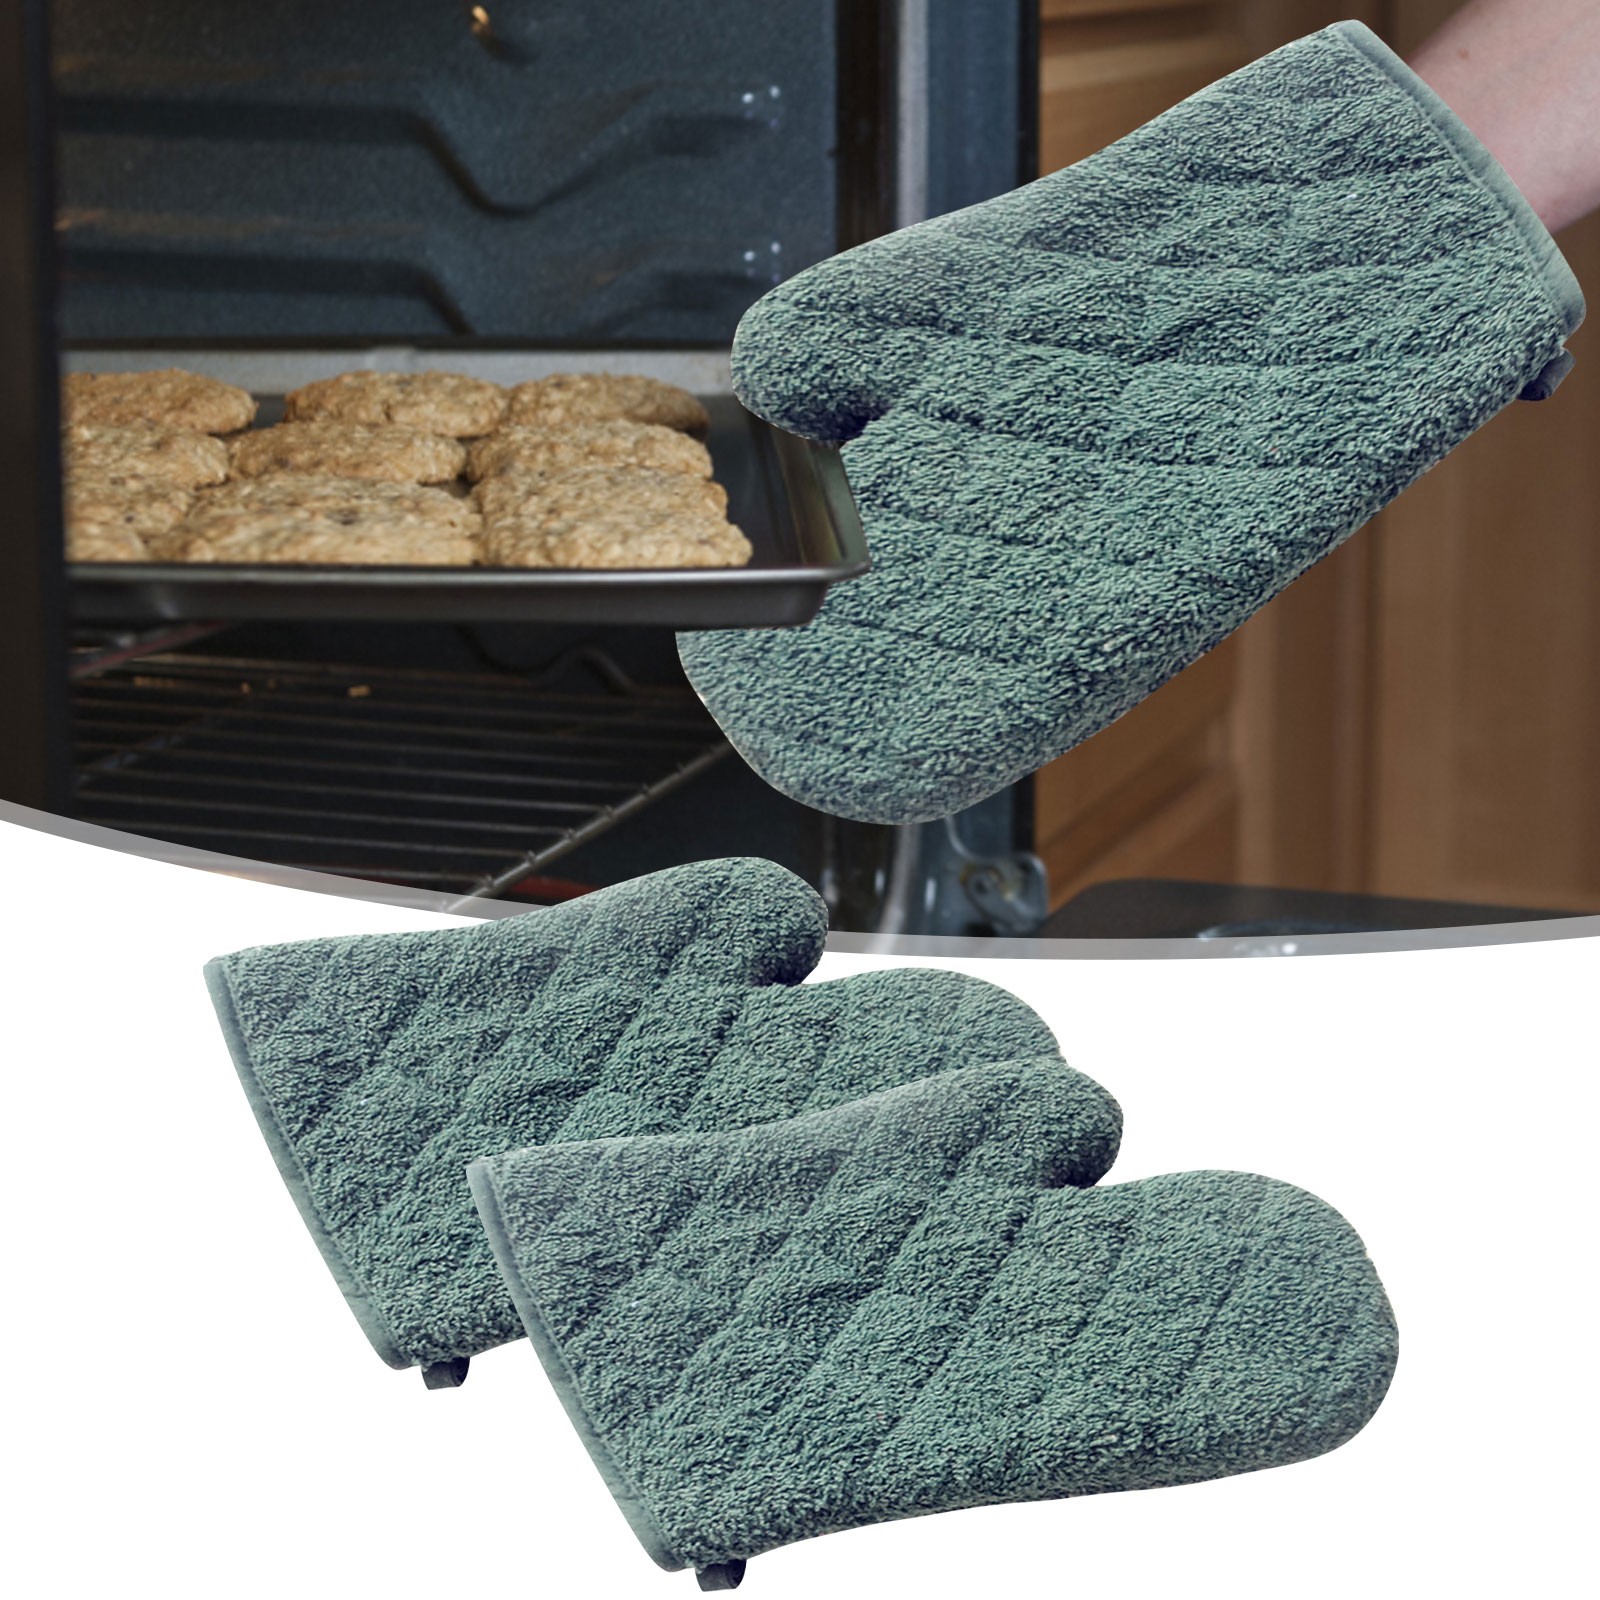 OUTlOU Baking and cotton Towel Baking Insulation Microwave Oven Gloves ...